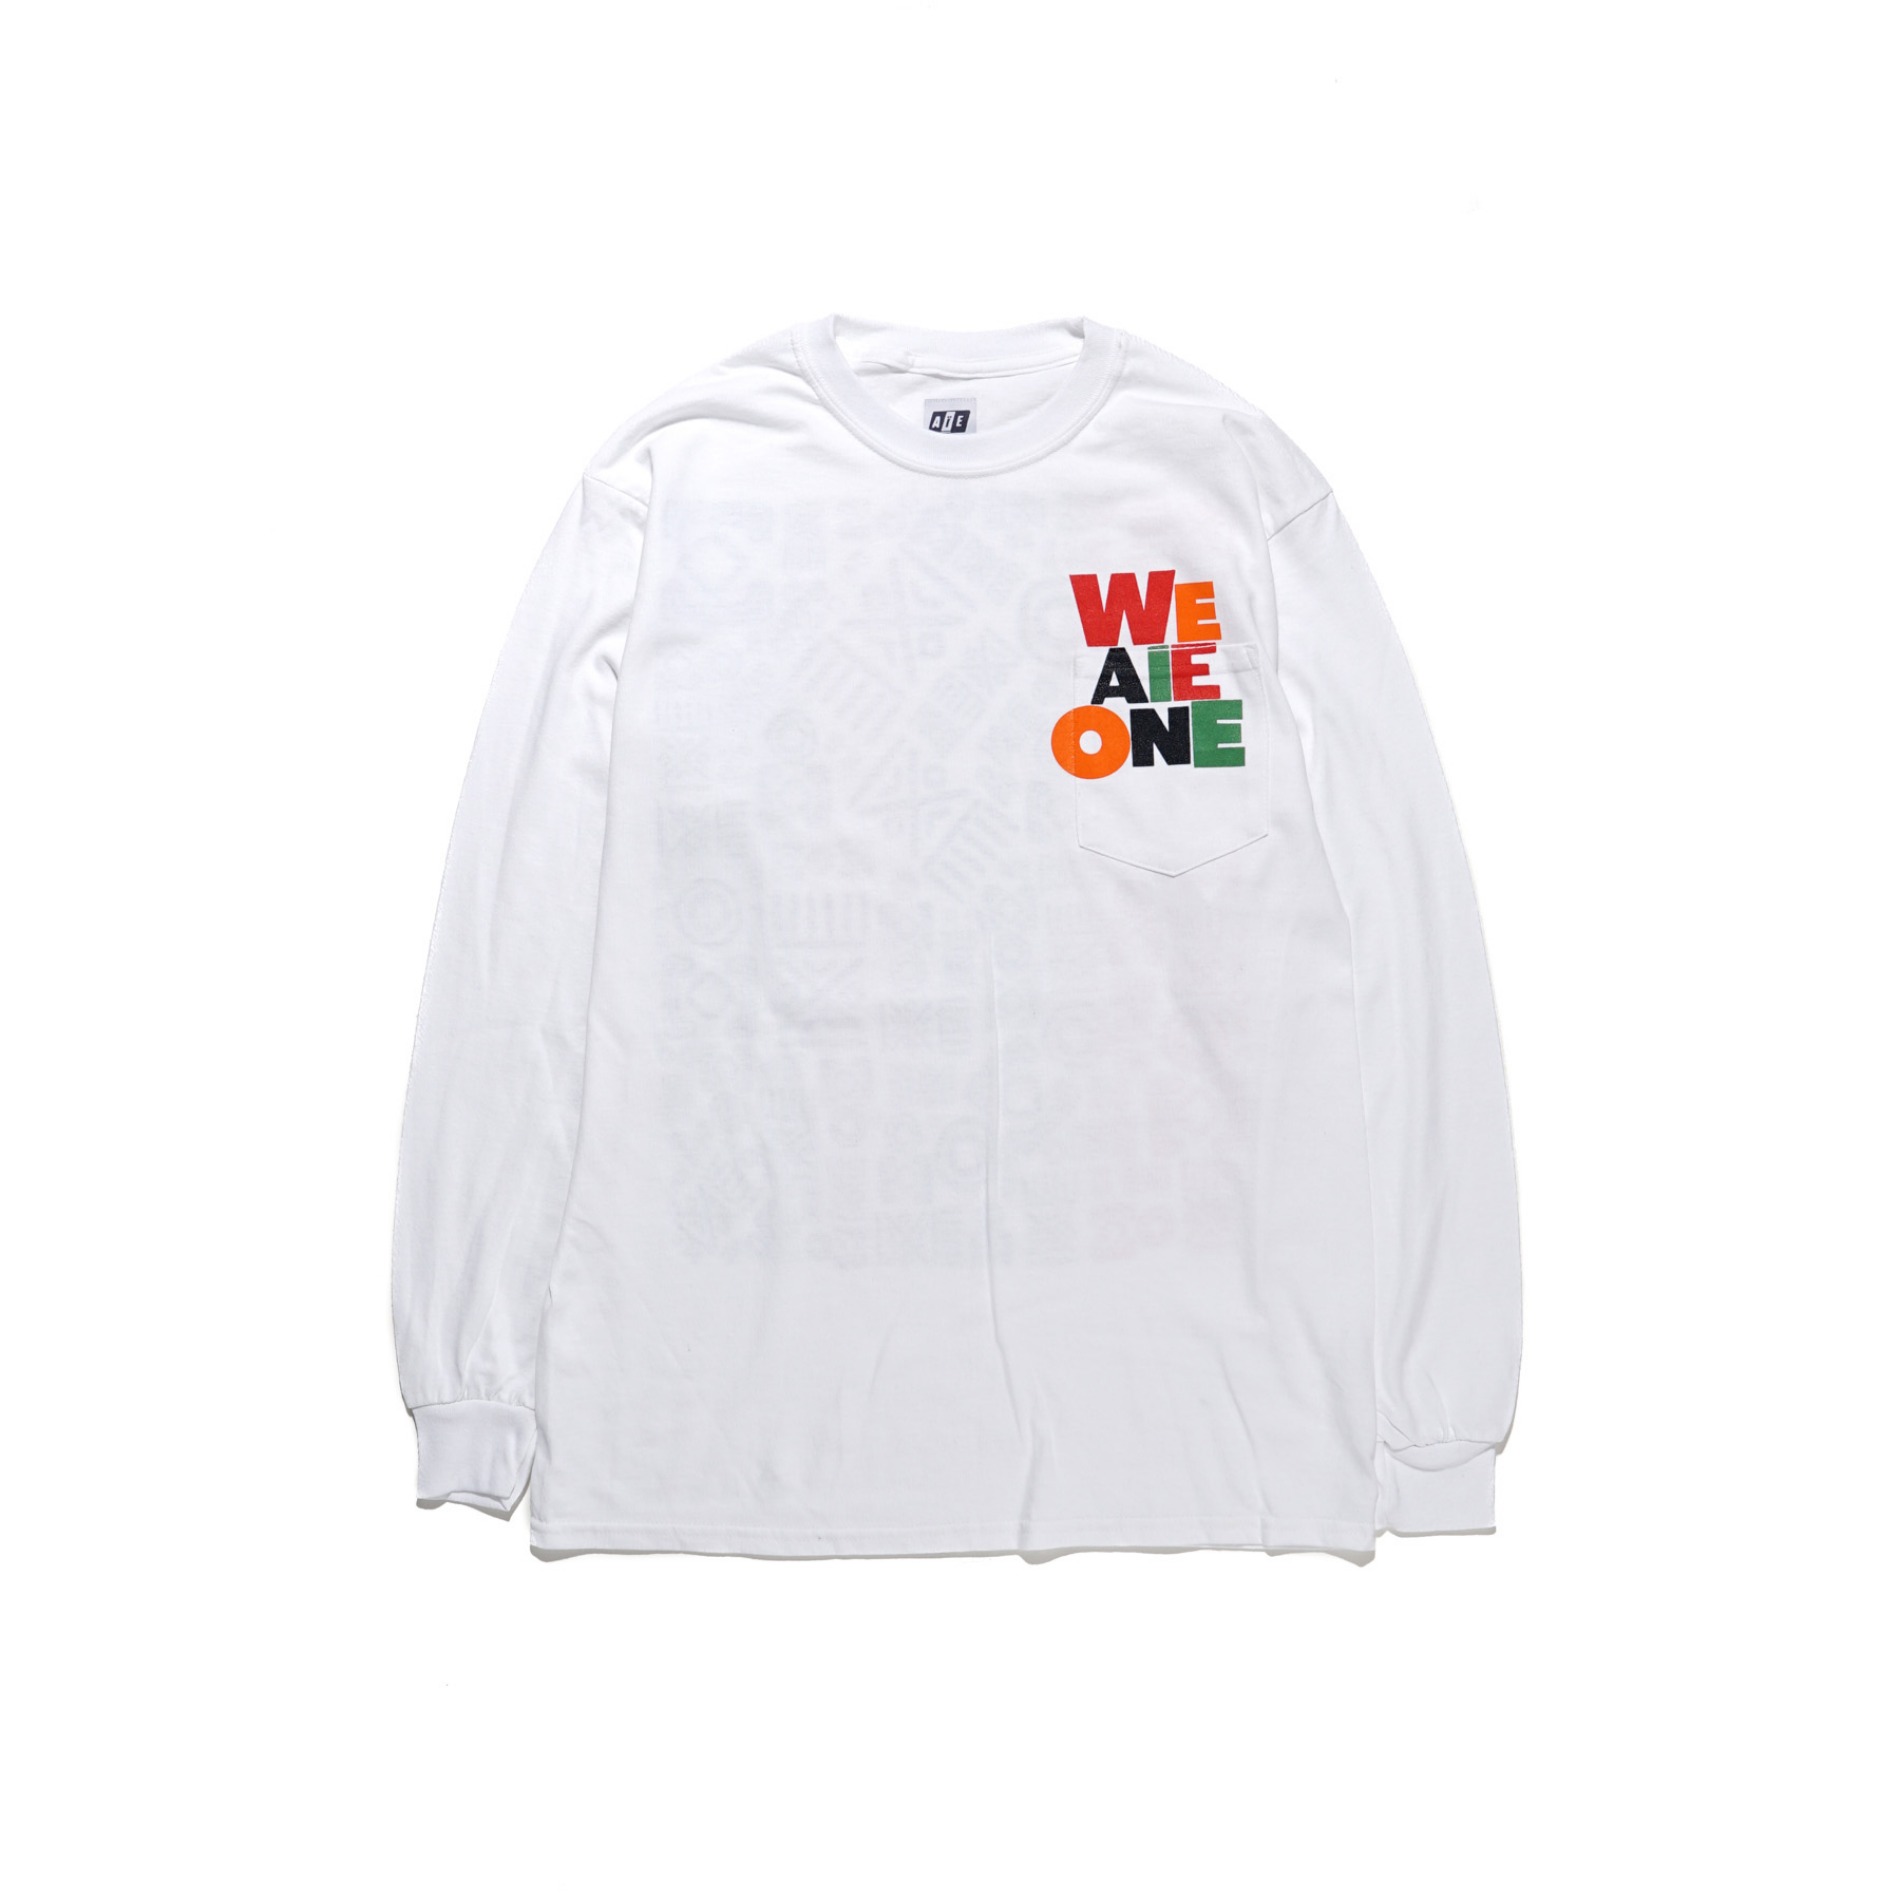 SS22 AIE / PRINTED WE AIE ONE L/S POCKET TEE WHITE